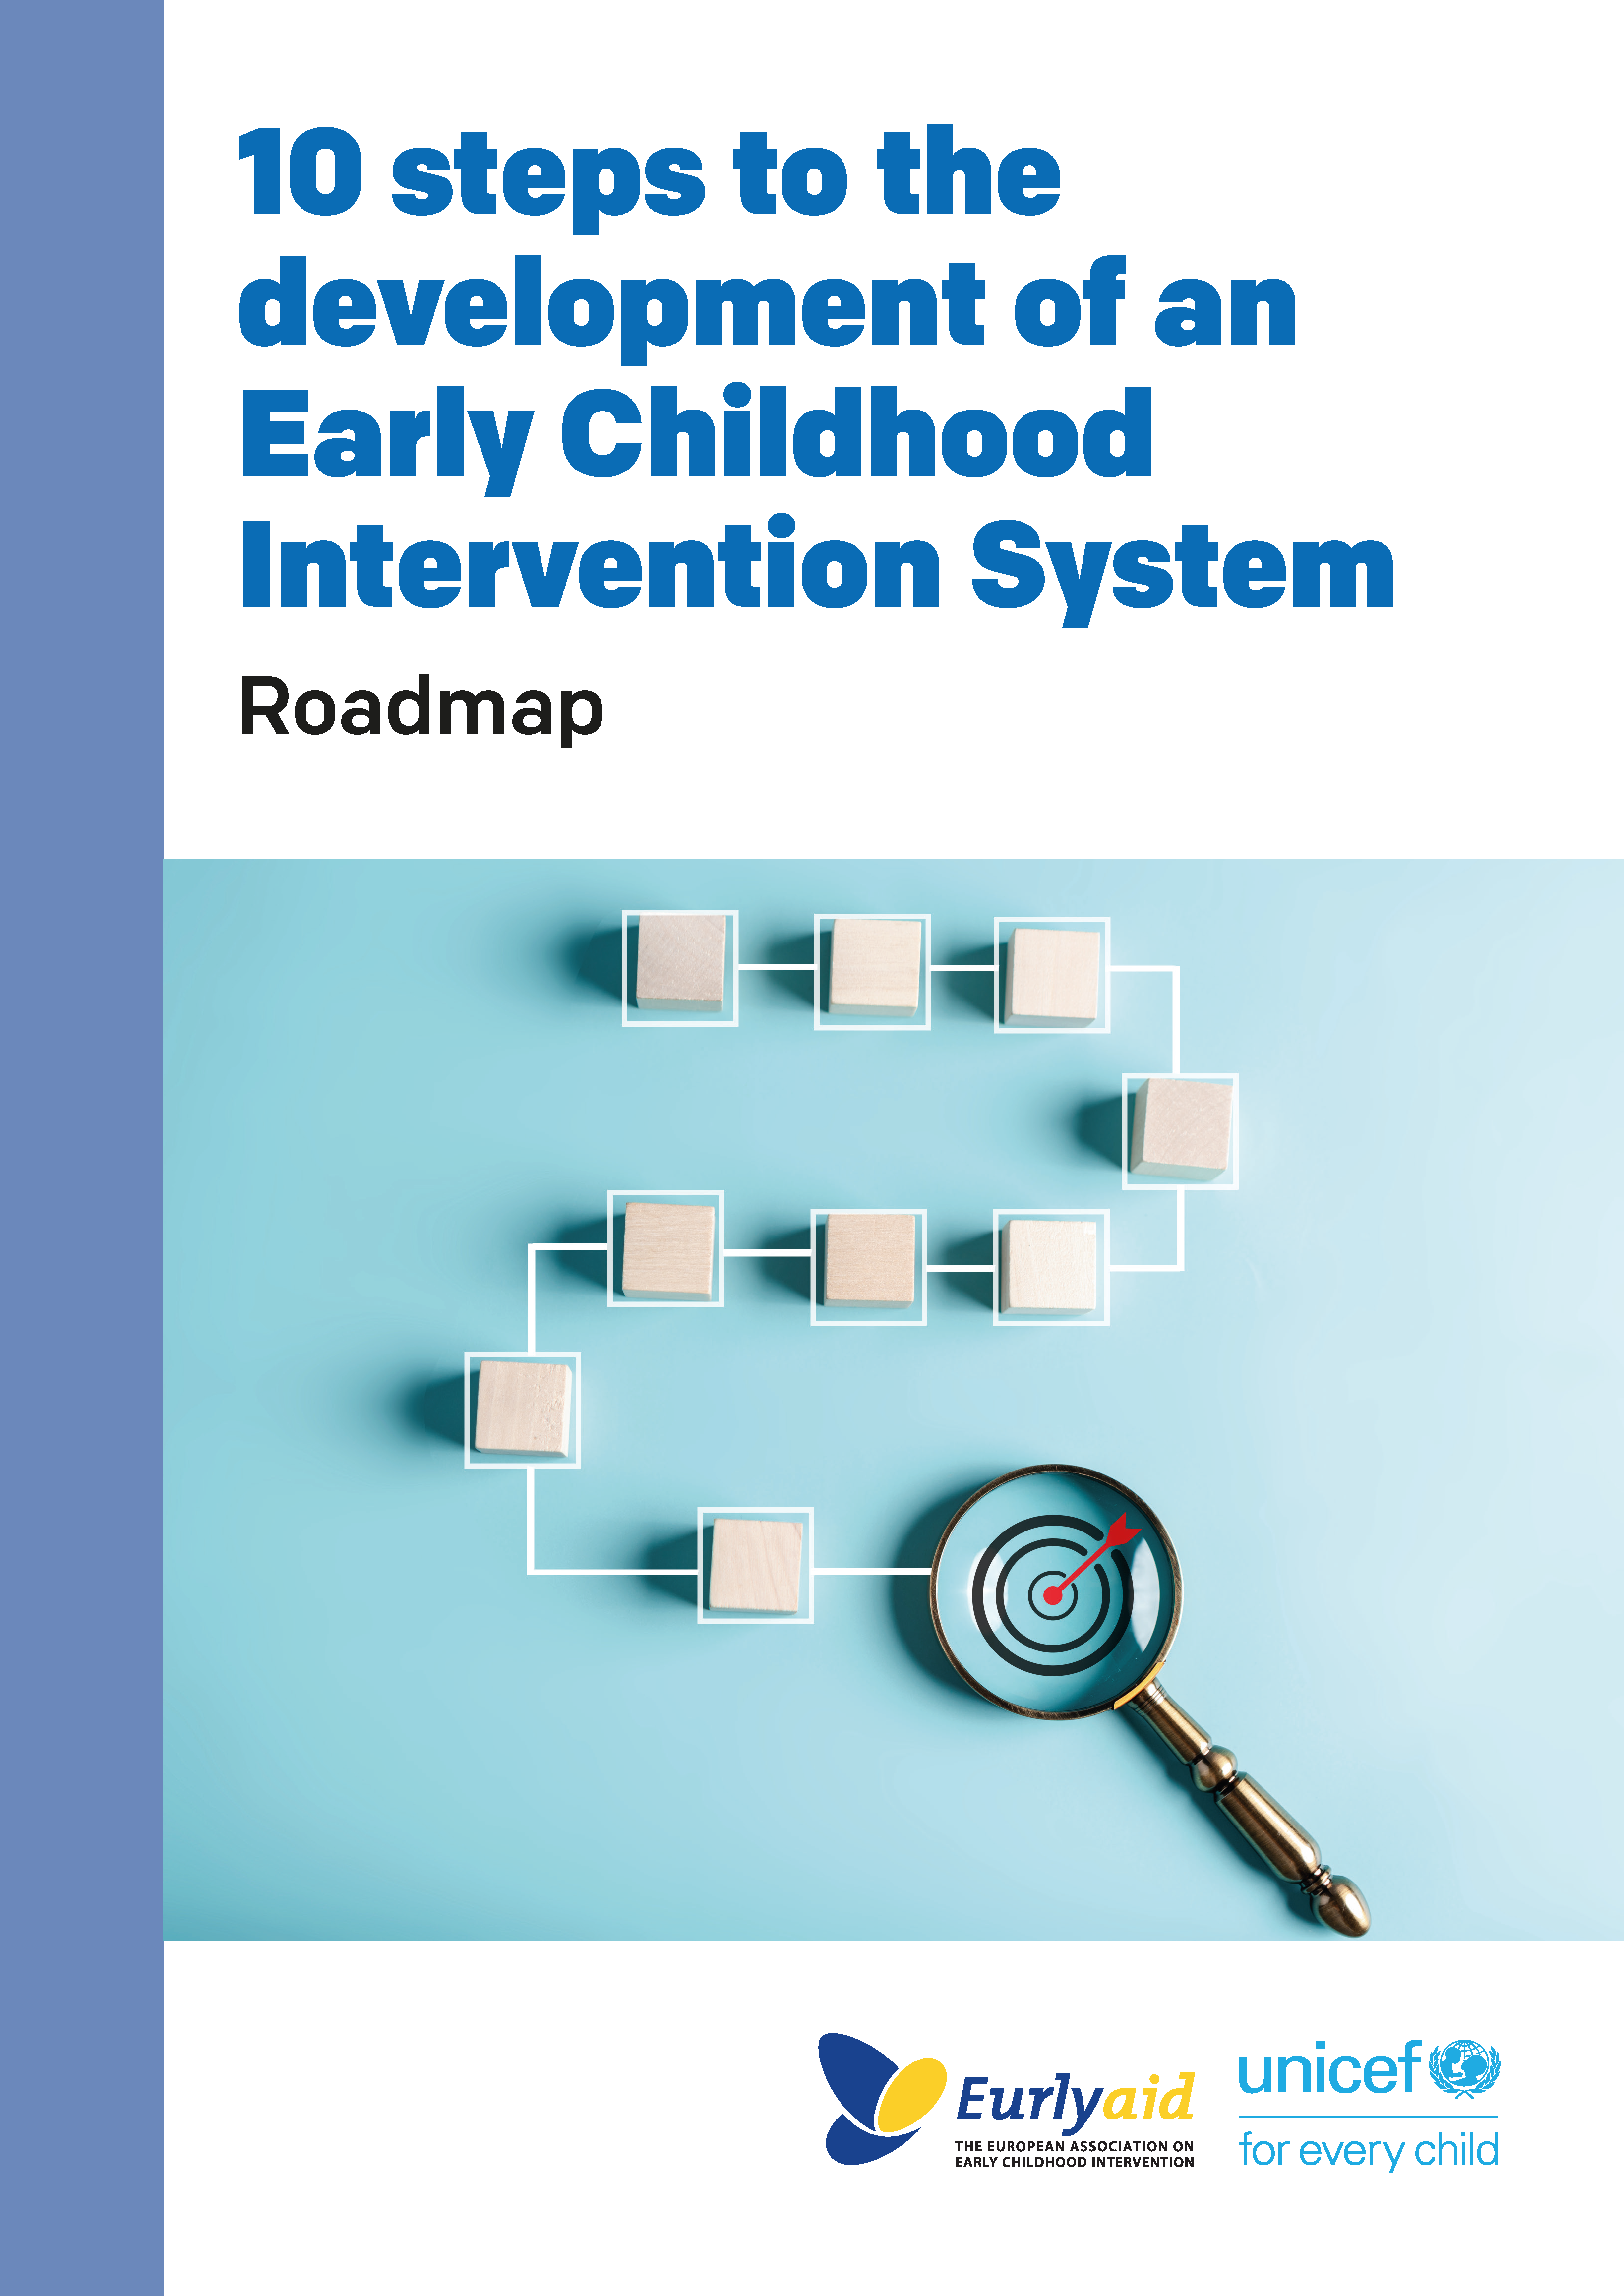 10 steps to the development of an Early Childhood Intervention System